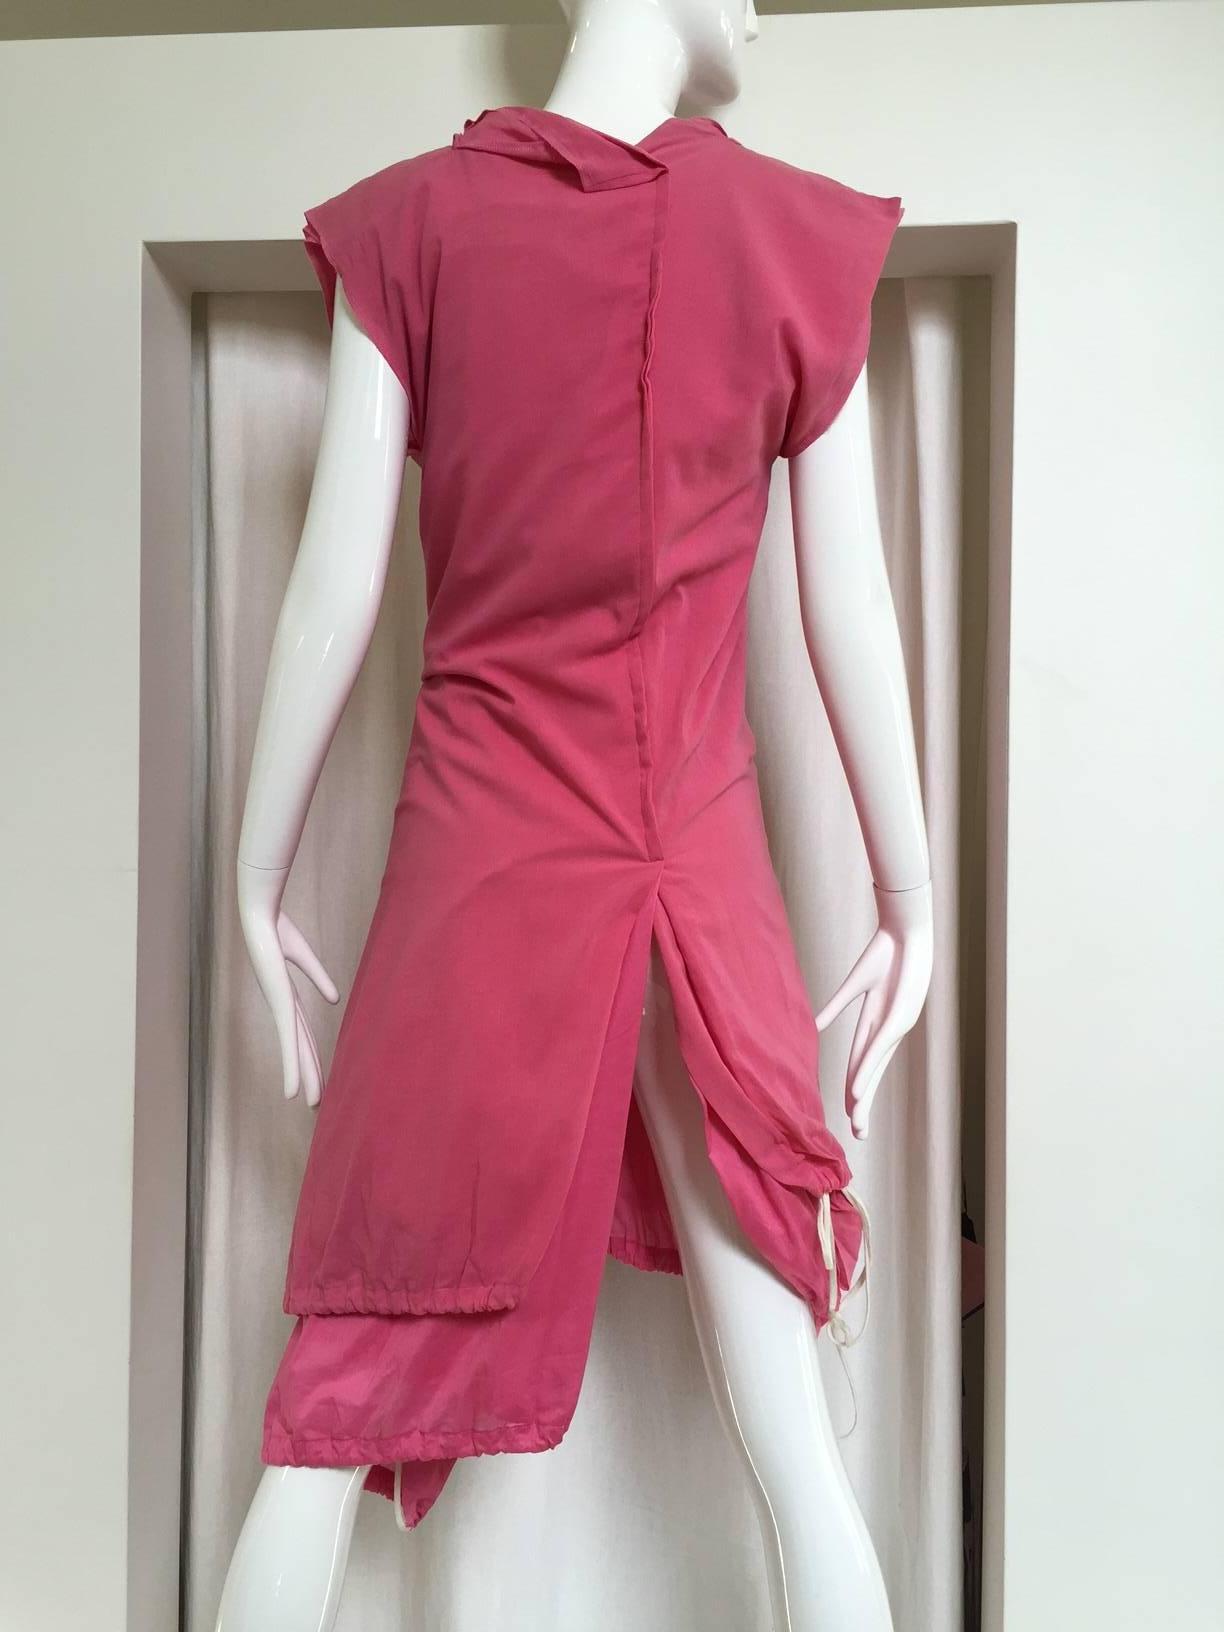 2007 Comme Des Garcons buble gum pink cotton double layer shirt dress or it can be worn as vest top with drawstring. two different double layer shirt dresses in two slightly different pink fabrics are joined down the rear center seam, each layer